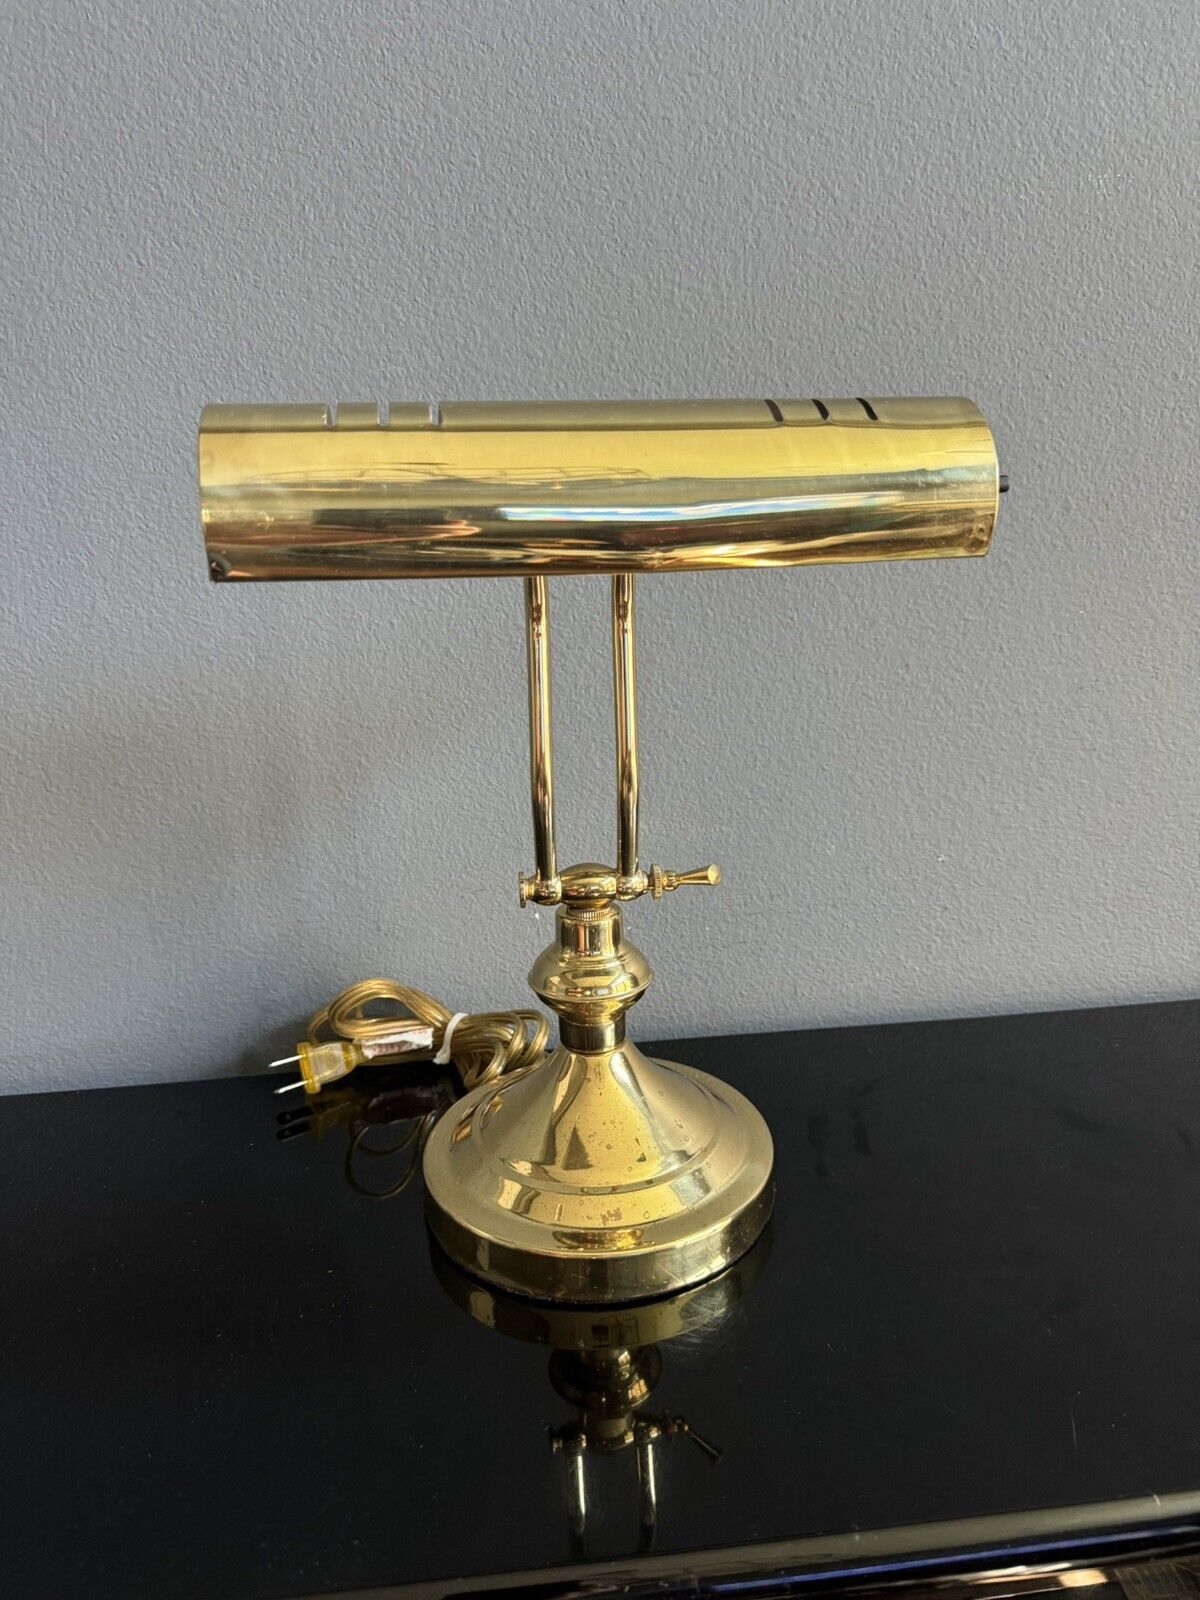 Vintage Crown Court Brass Desk Lamp - 13.5 Inches Tall Gold Cord Adjustable